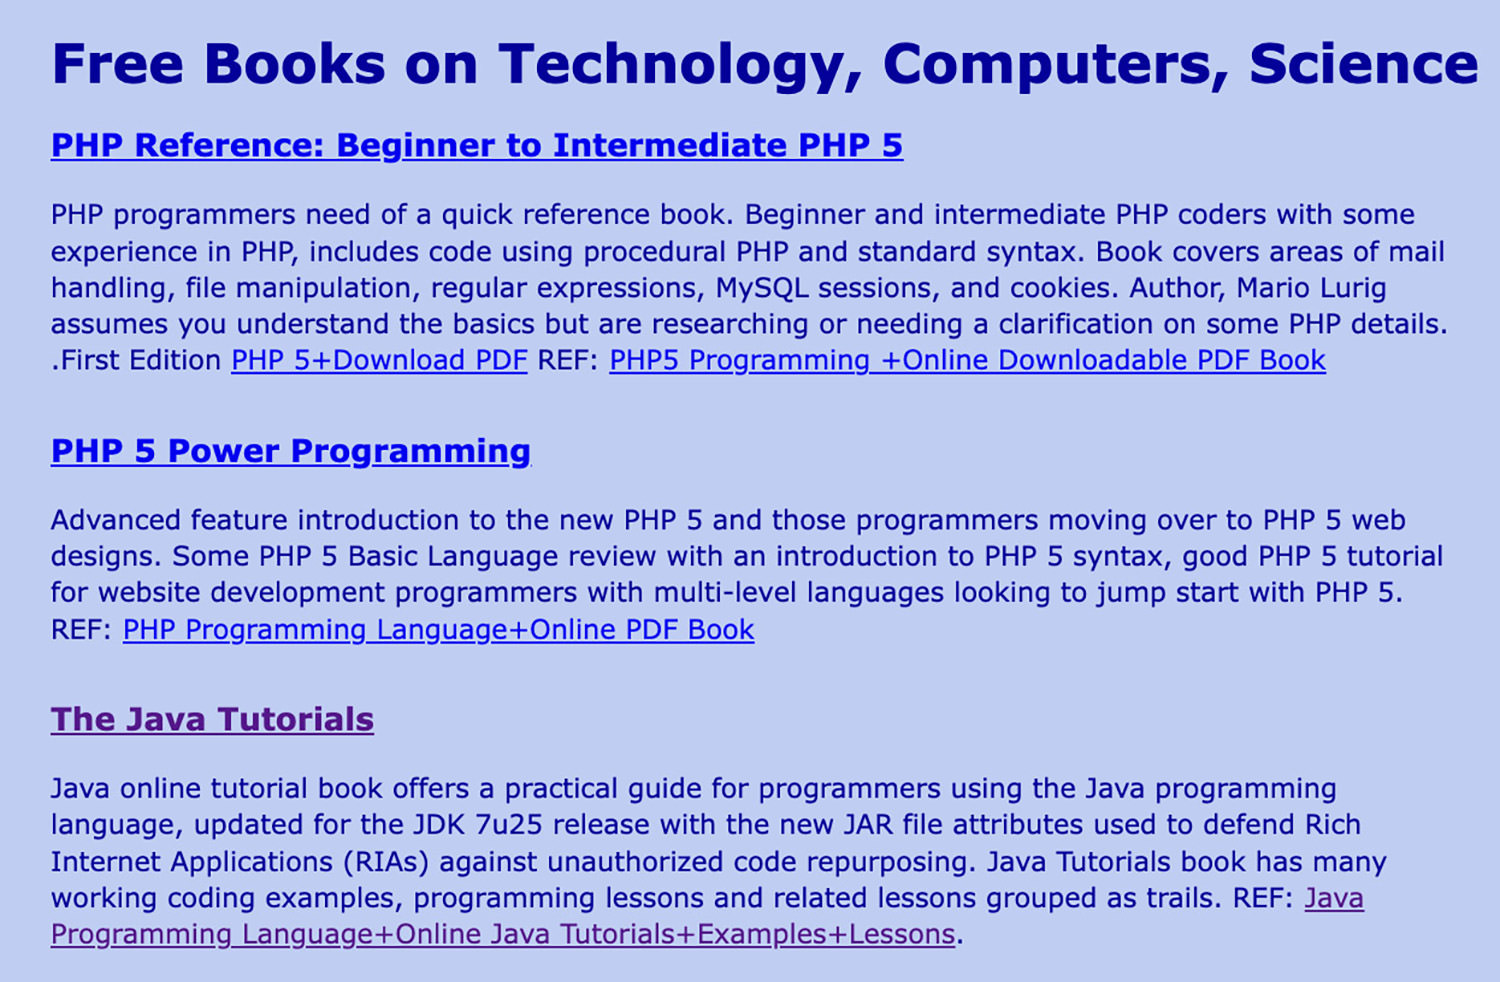 Image of Tech Books for Free Download website